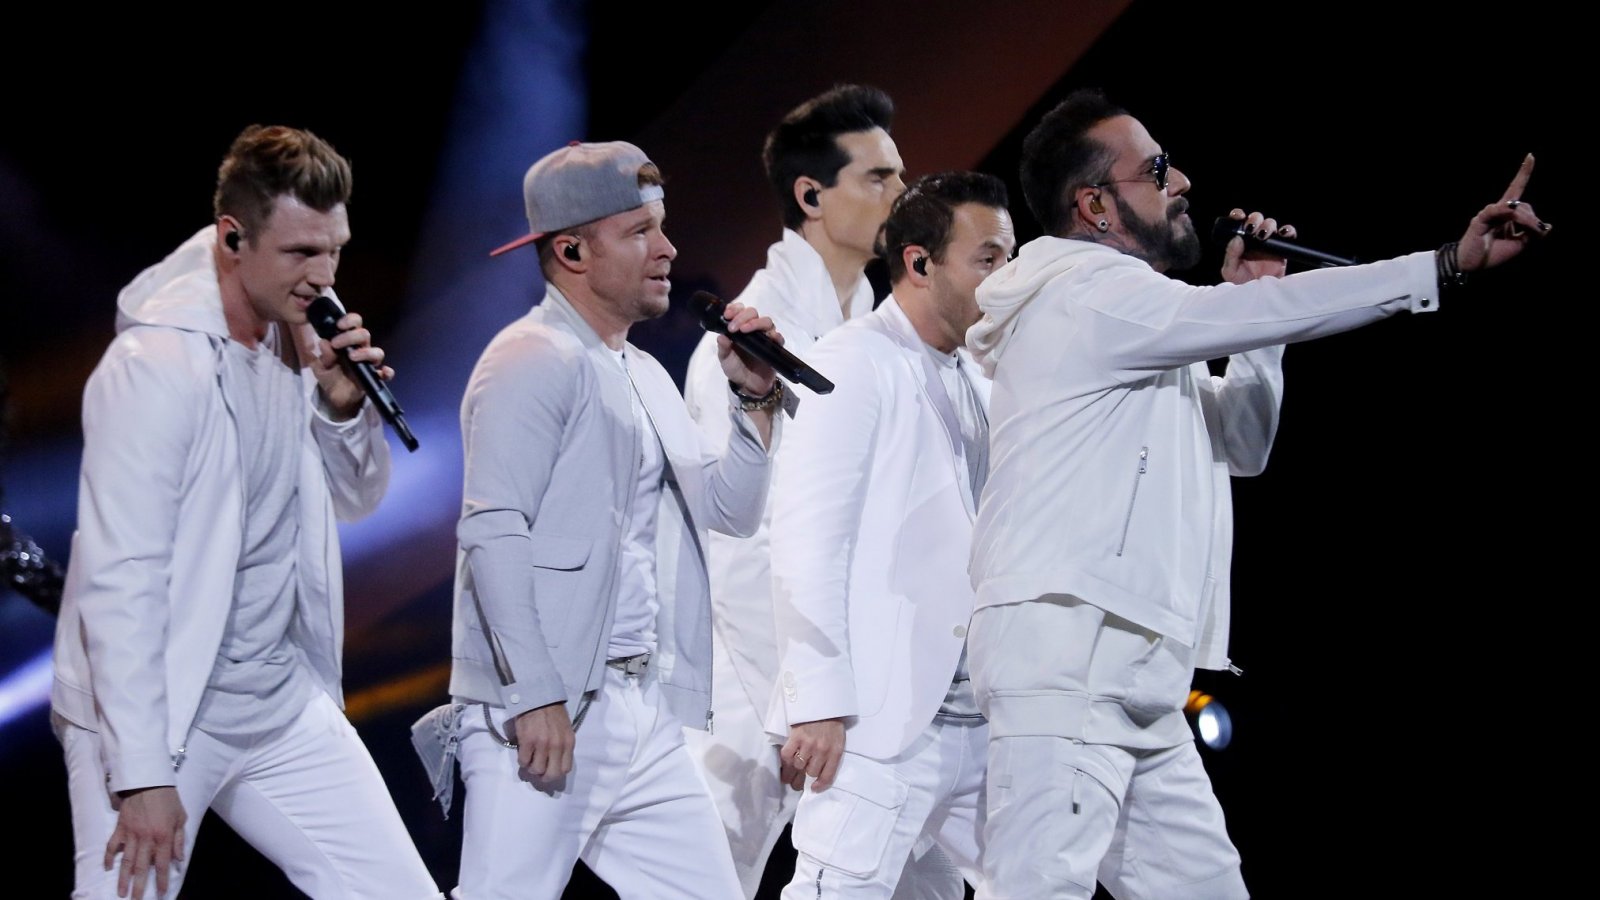 Backstreet Boys wearing white outfits while holding microphones